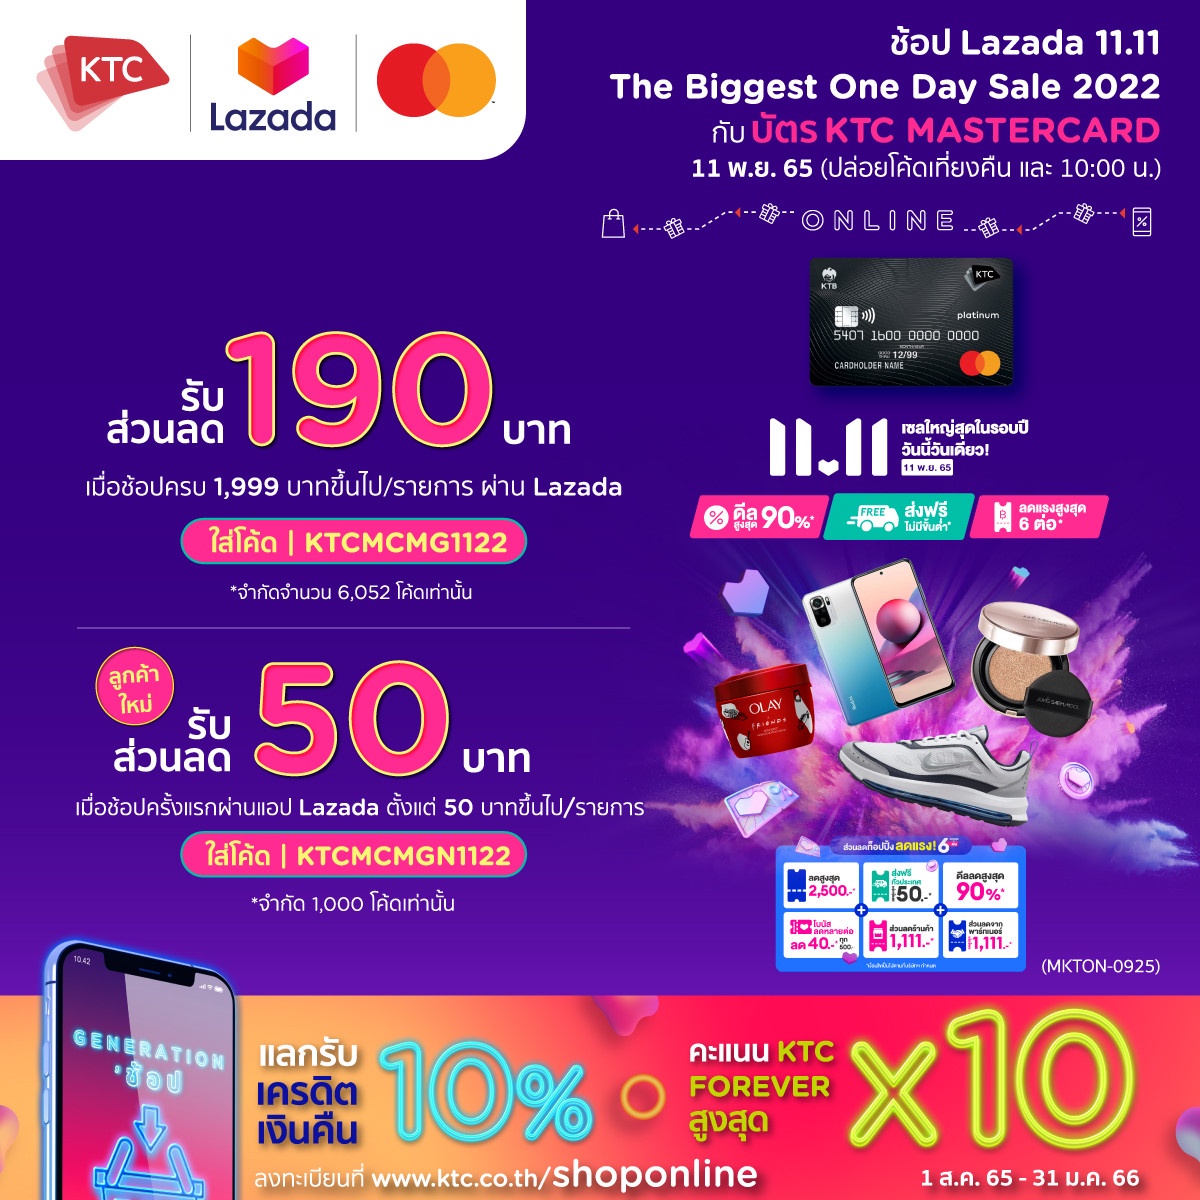 KTC MASTERCARD Cardmembers Enjoy Special Privileges with Lazada 11.11 The Biggest One Day Sale 2022